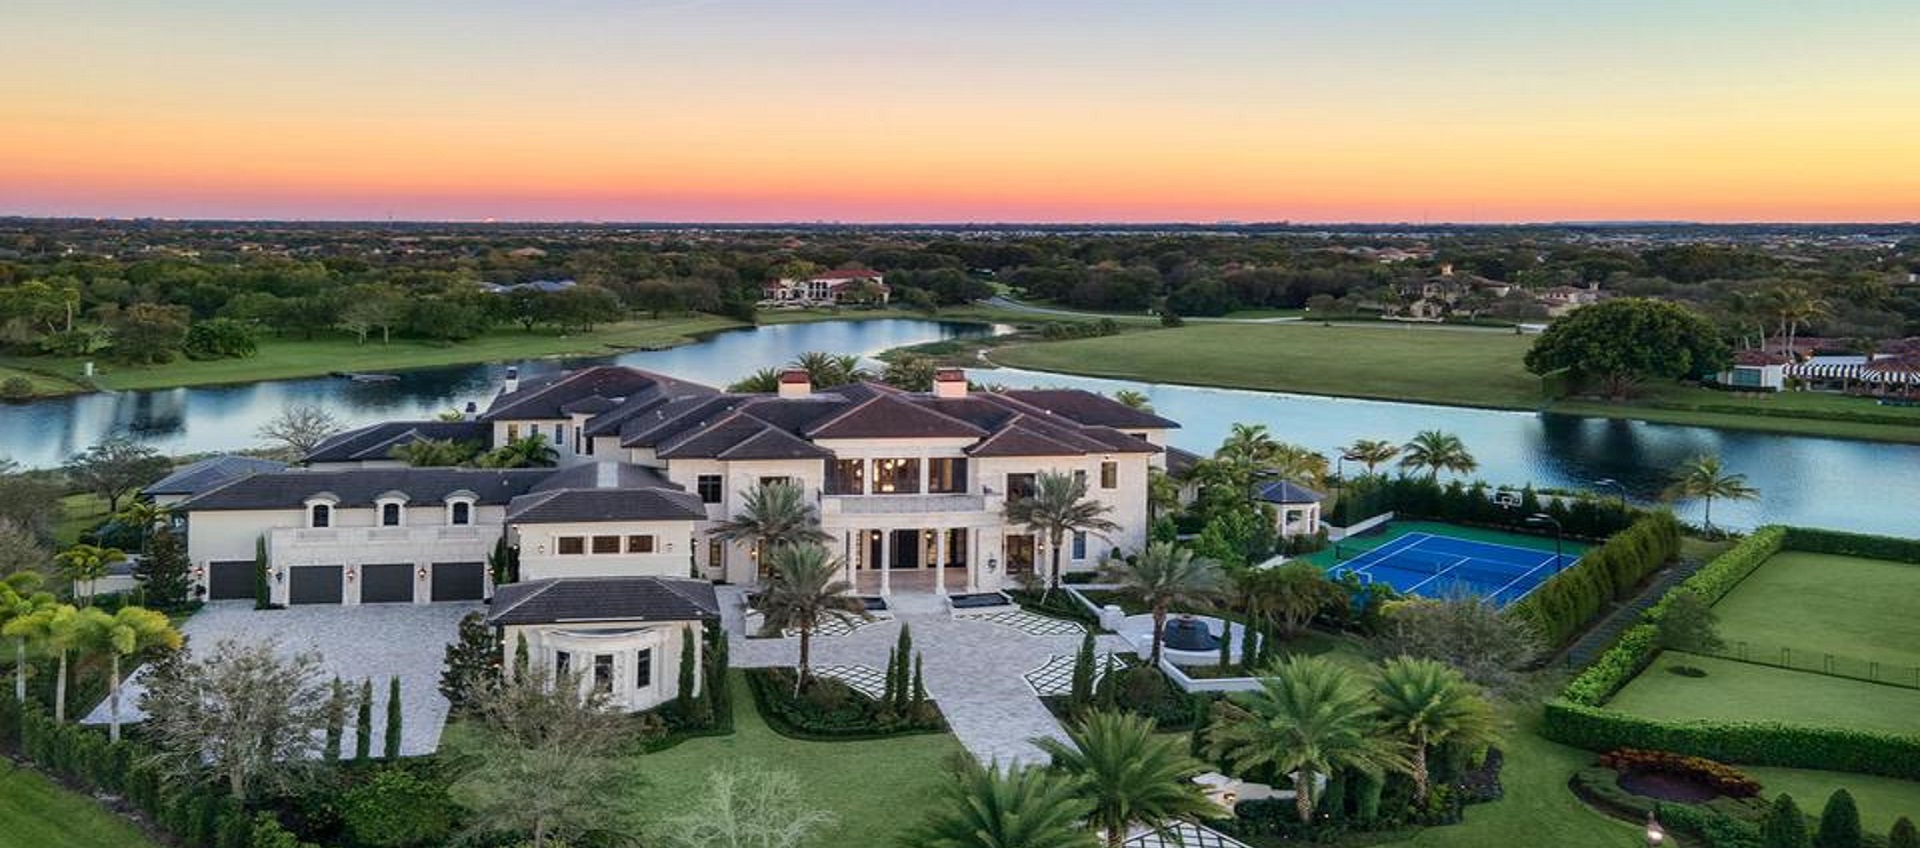 Mega Mansion in Delray Beach's Stone Creek ranches